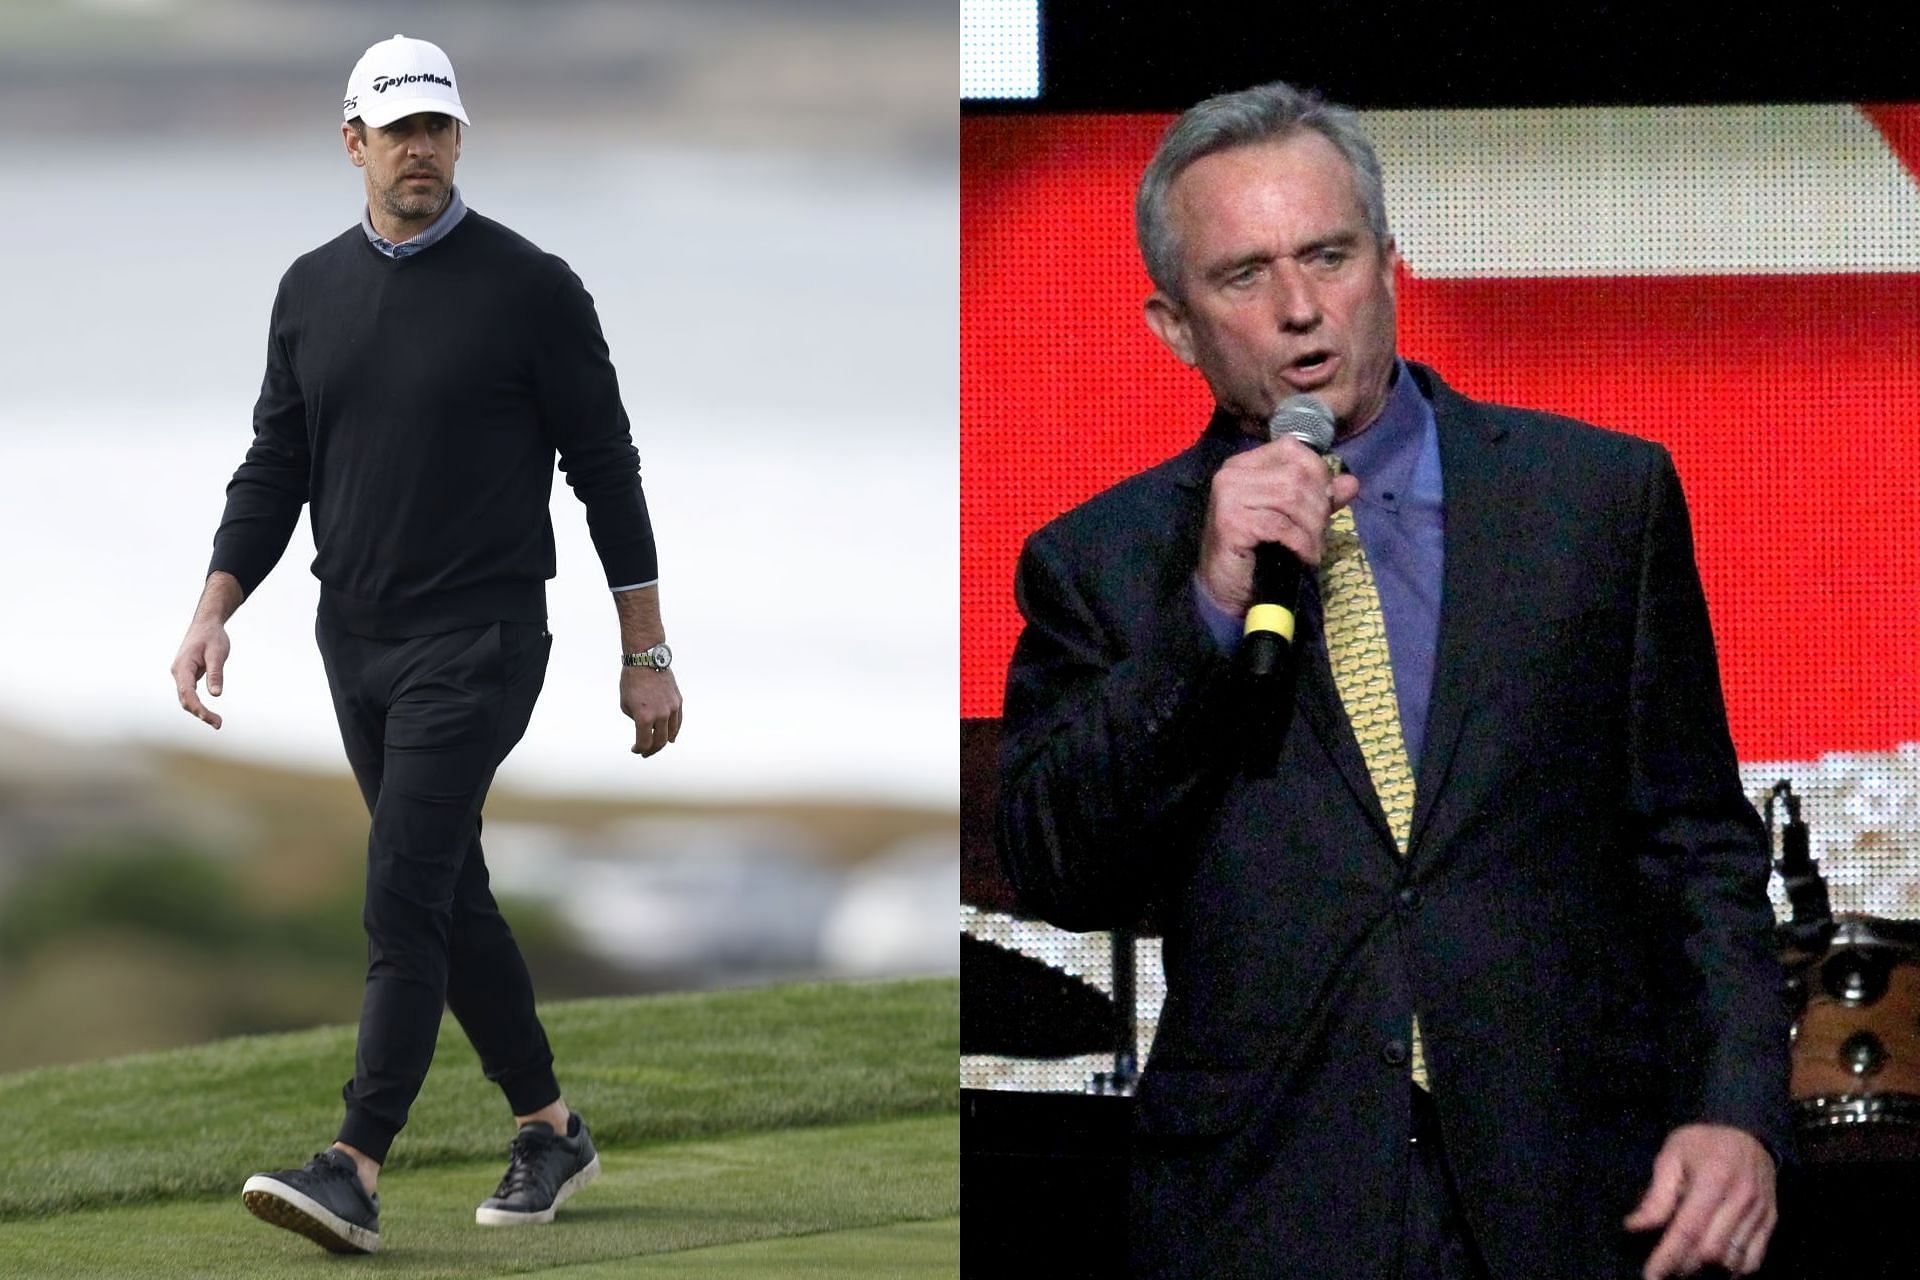 Aaron Rodgers (L) and Robert F. Kennedy Jr. (R)